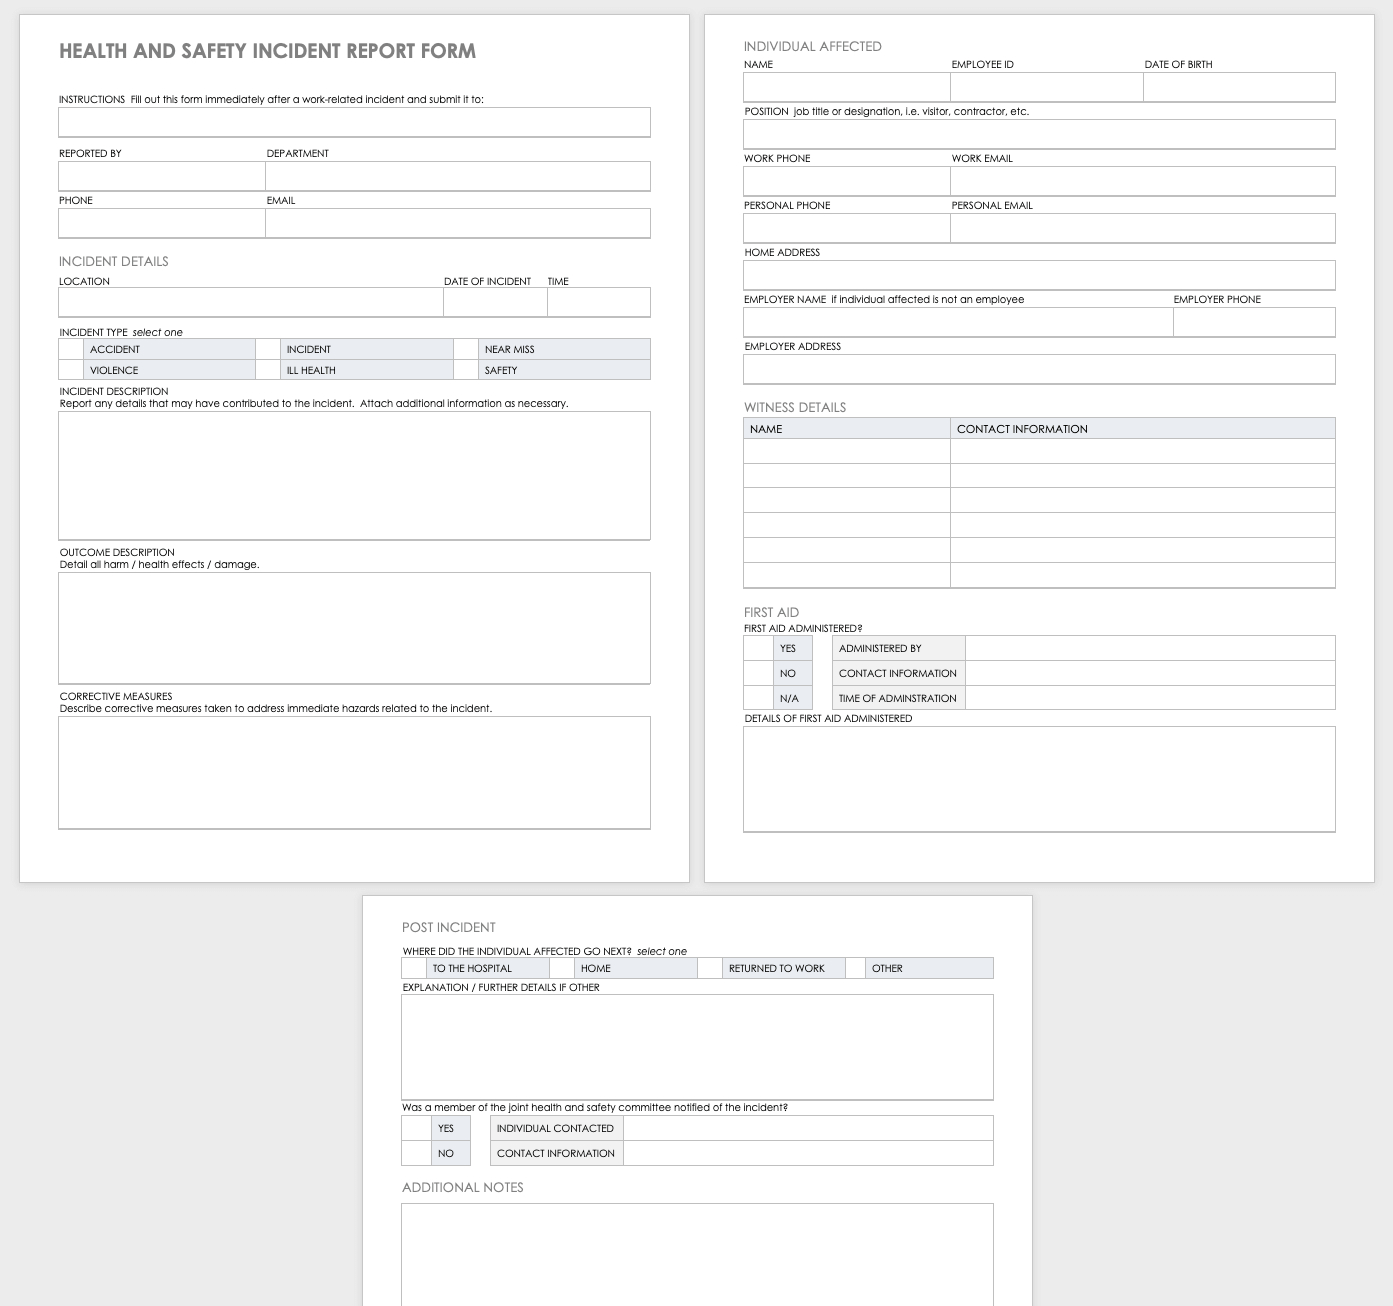 Free Workplace Accident Report Templates | Smartsheet For Health And Safety Incident Report Form Template